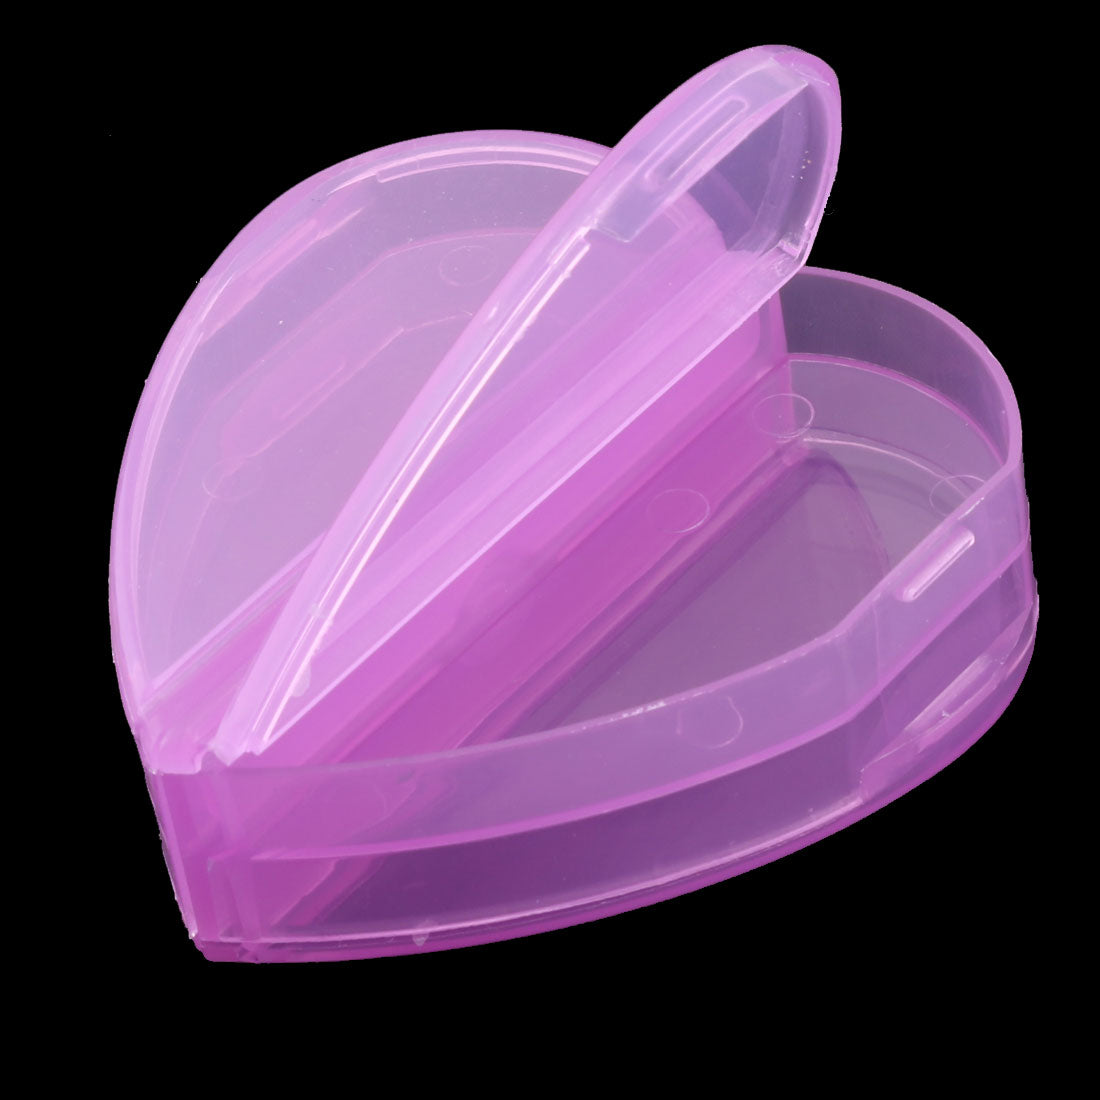 uxcell Uxcell Family Plastic Heart Shaped 4 Compartments Capsule Pills Storage Box Case Purple